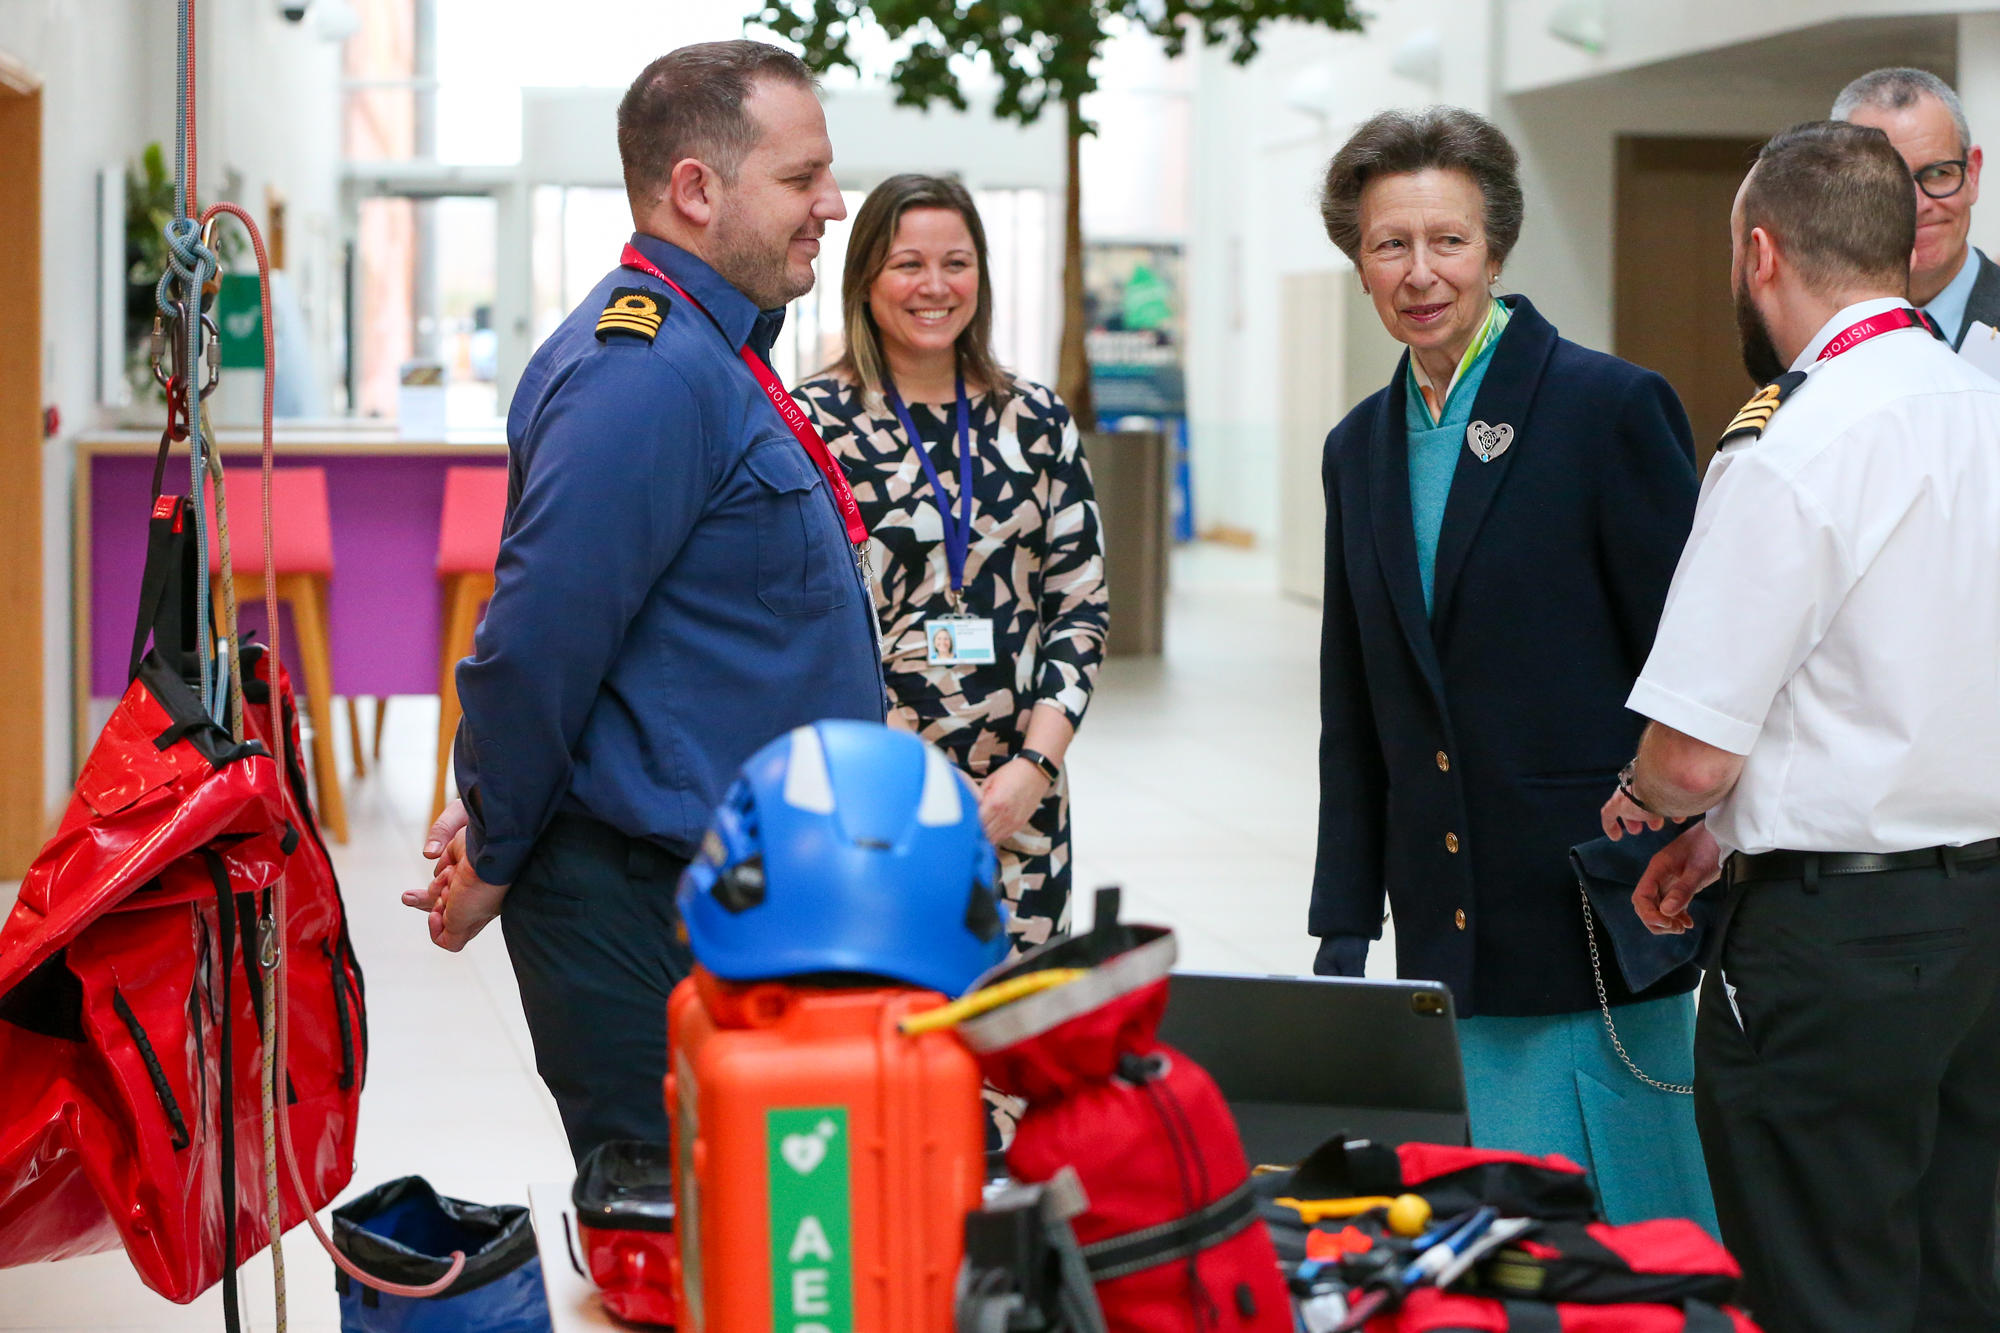 Her Royal Highness in discussion with the Maritime and Coastguard Agency